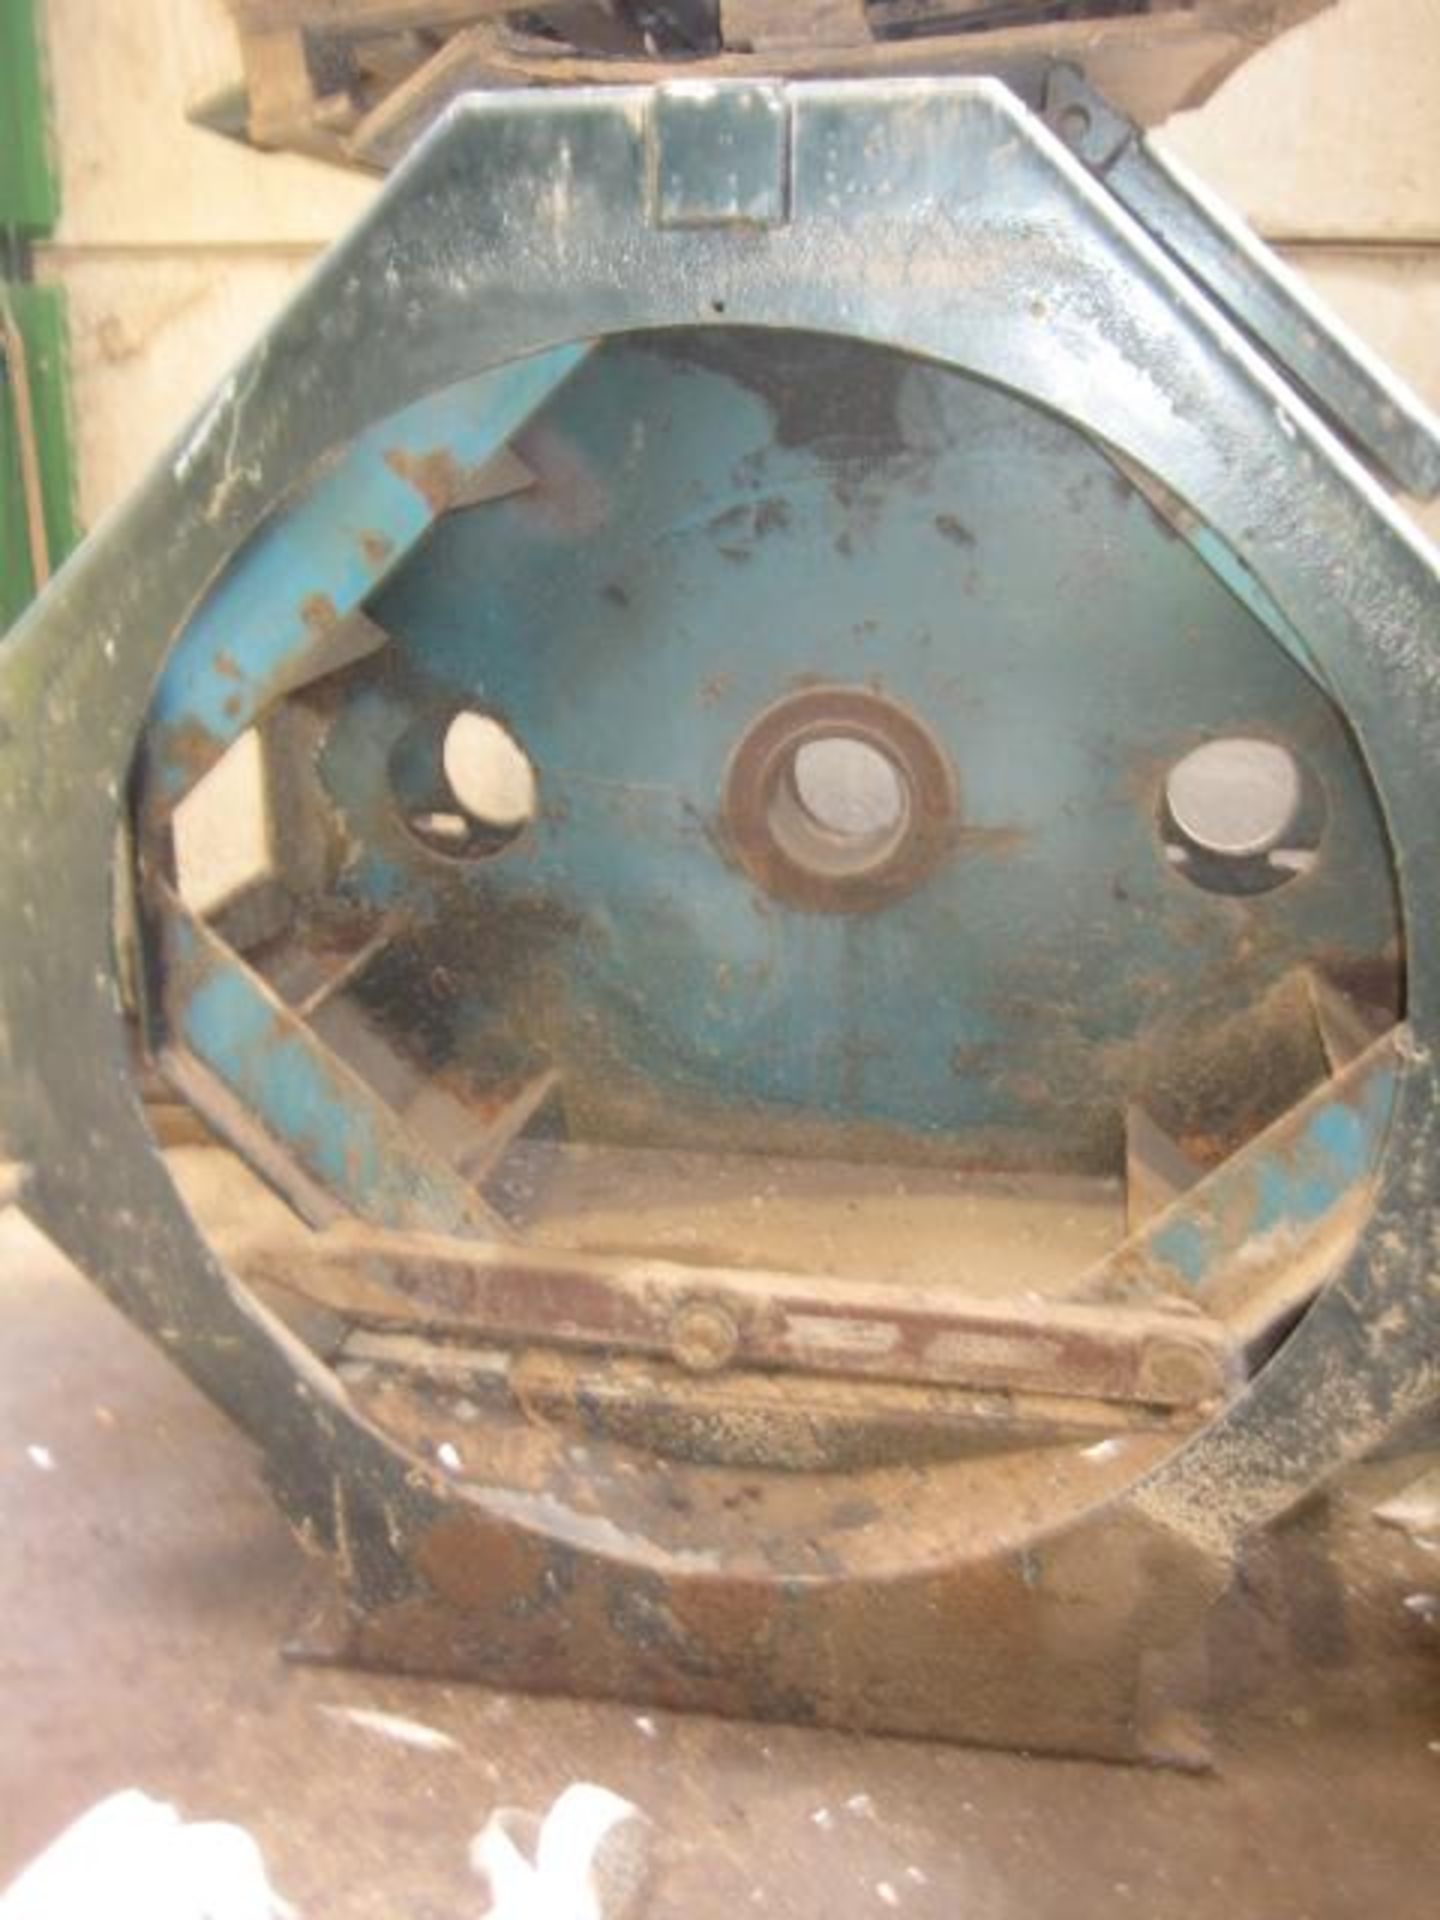 Paladin 1200WP Pellet Press Body (body only). Lot located in Lincoln, Lincolnshire Please read the